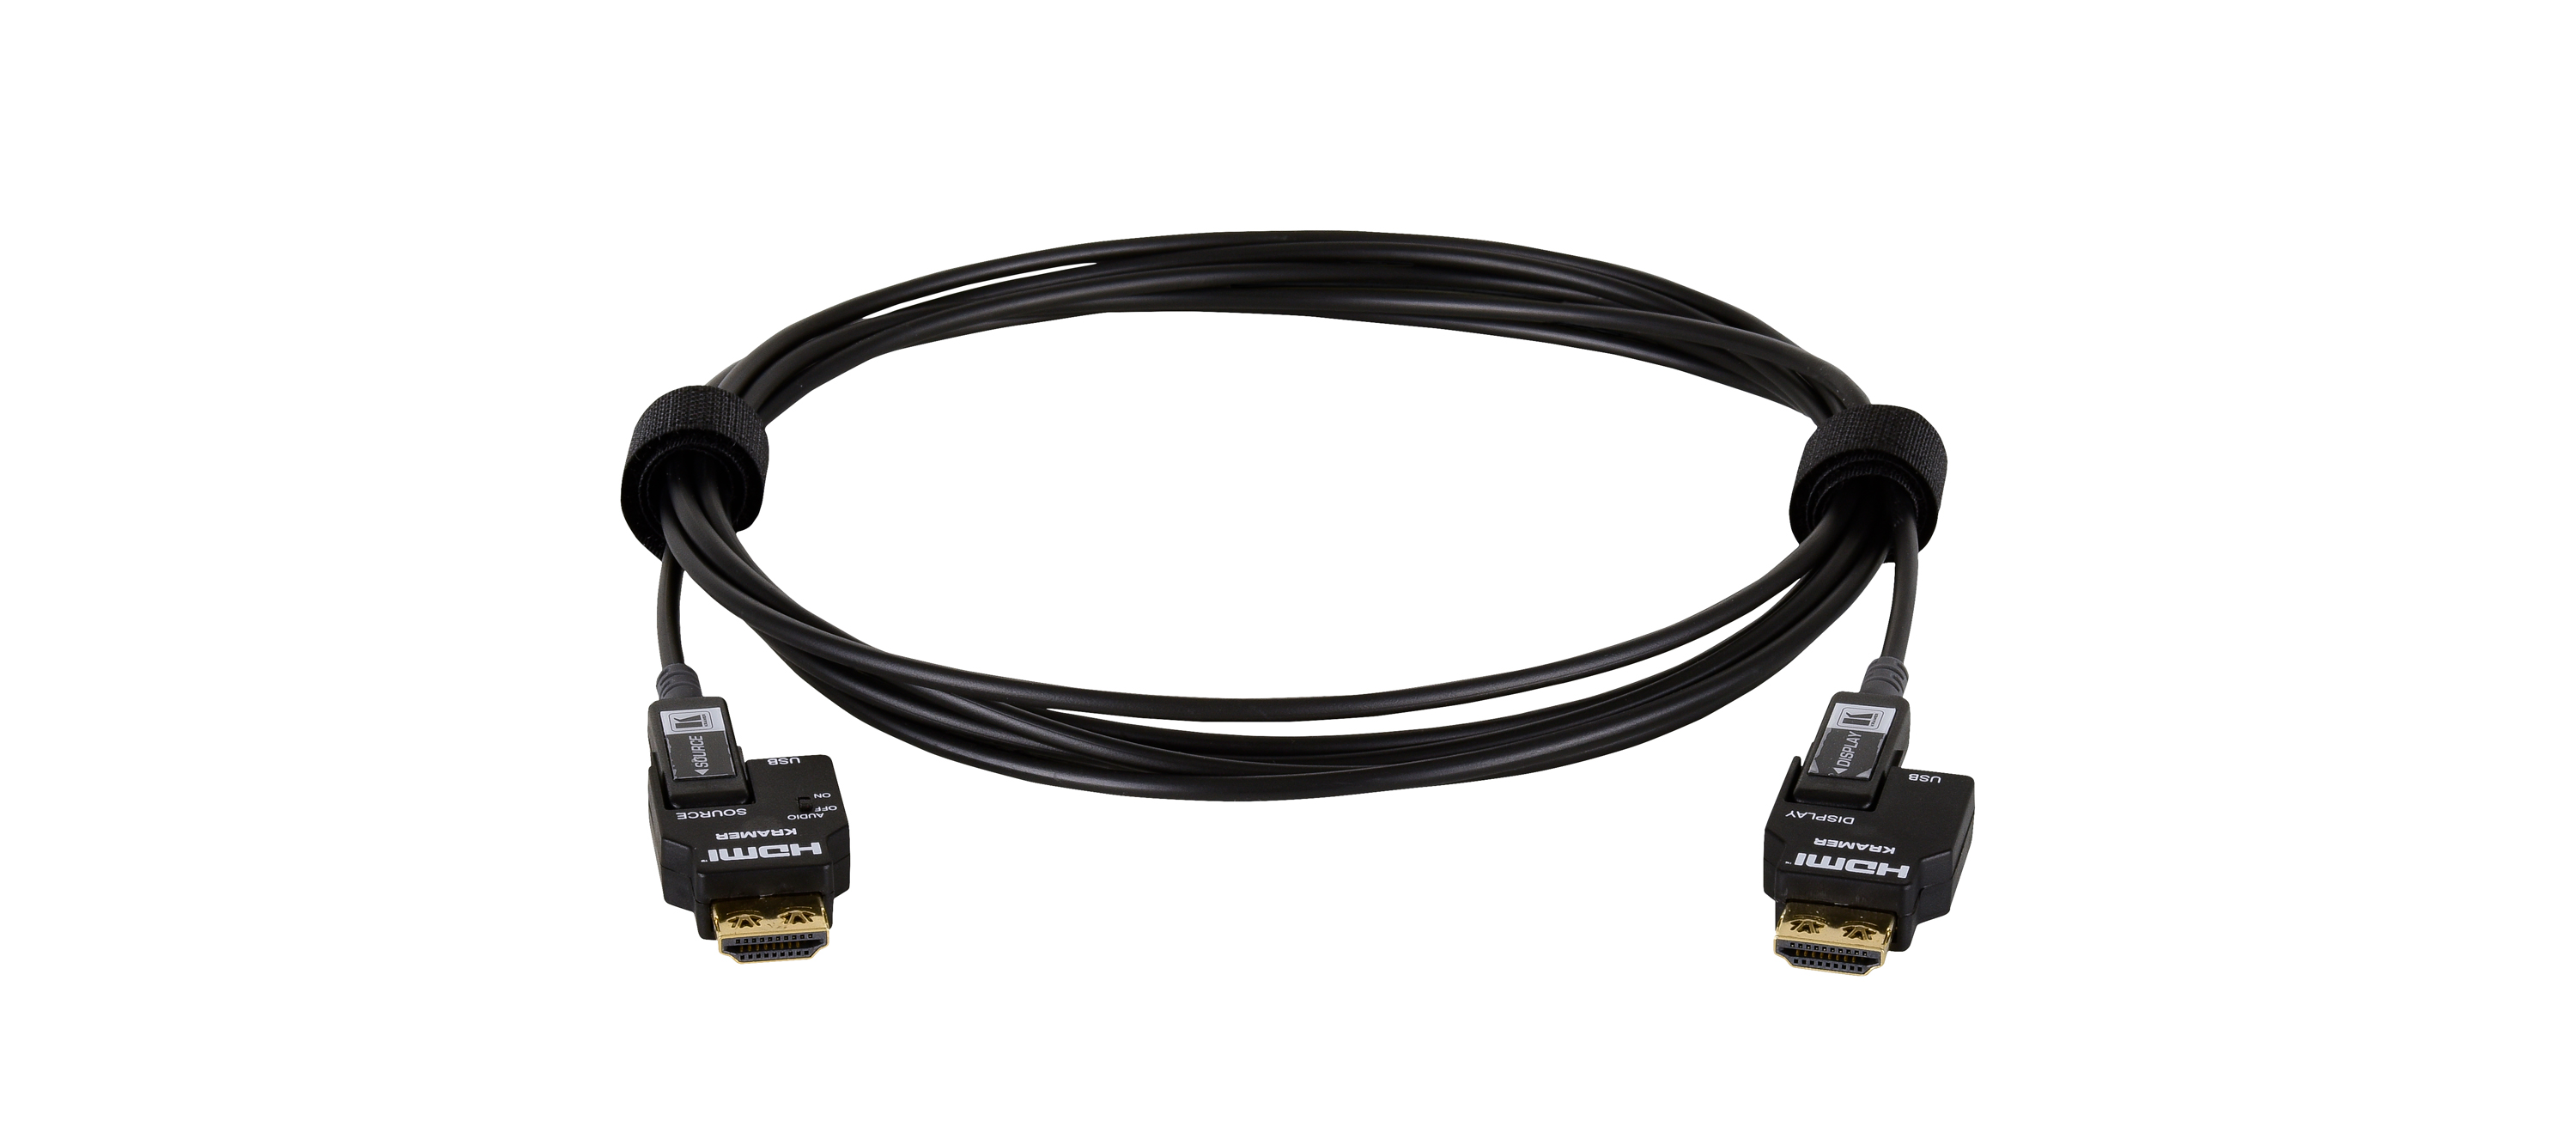 CRS-FIBERH-S1-131 Secured Unidirectional HDMI over Pure Fiber Cable - 131'